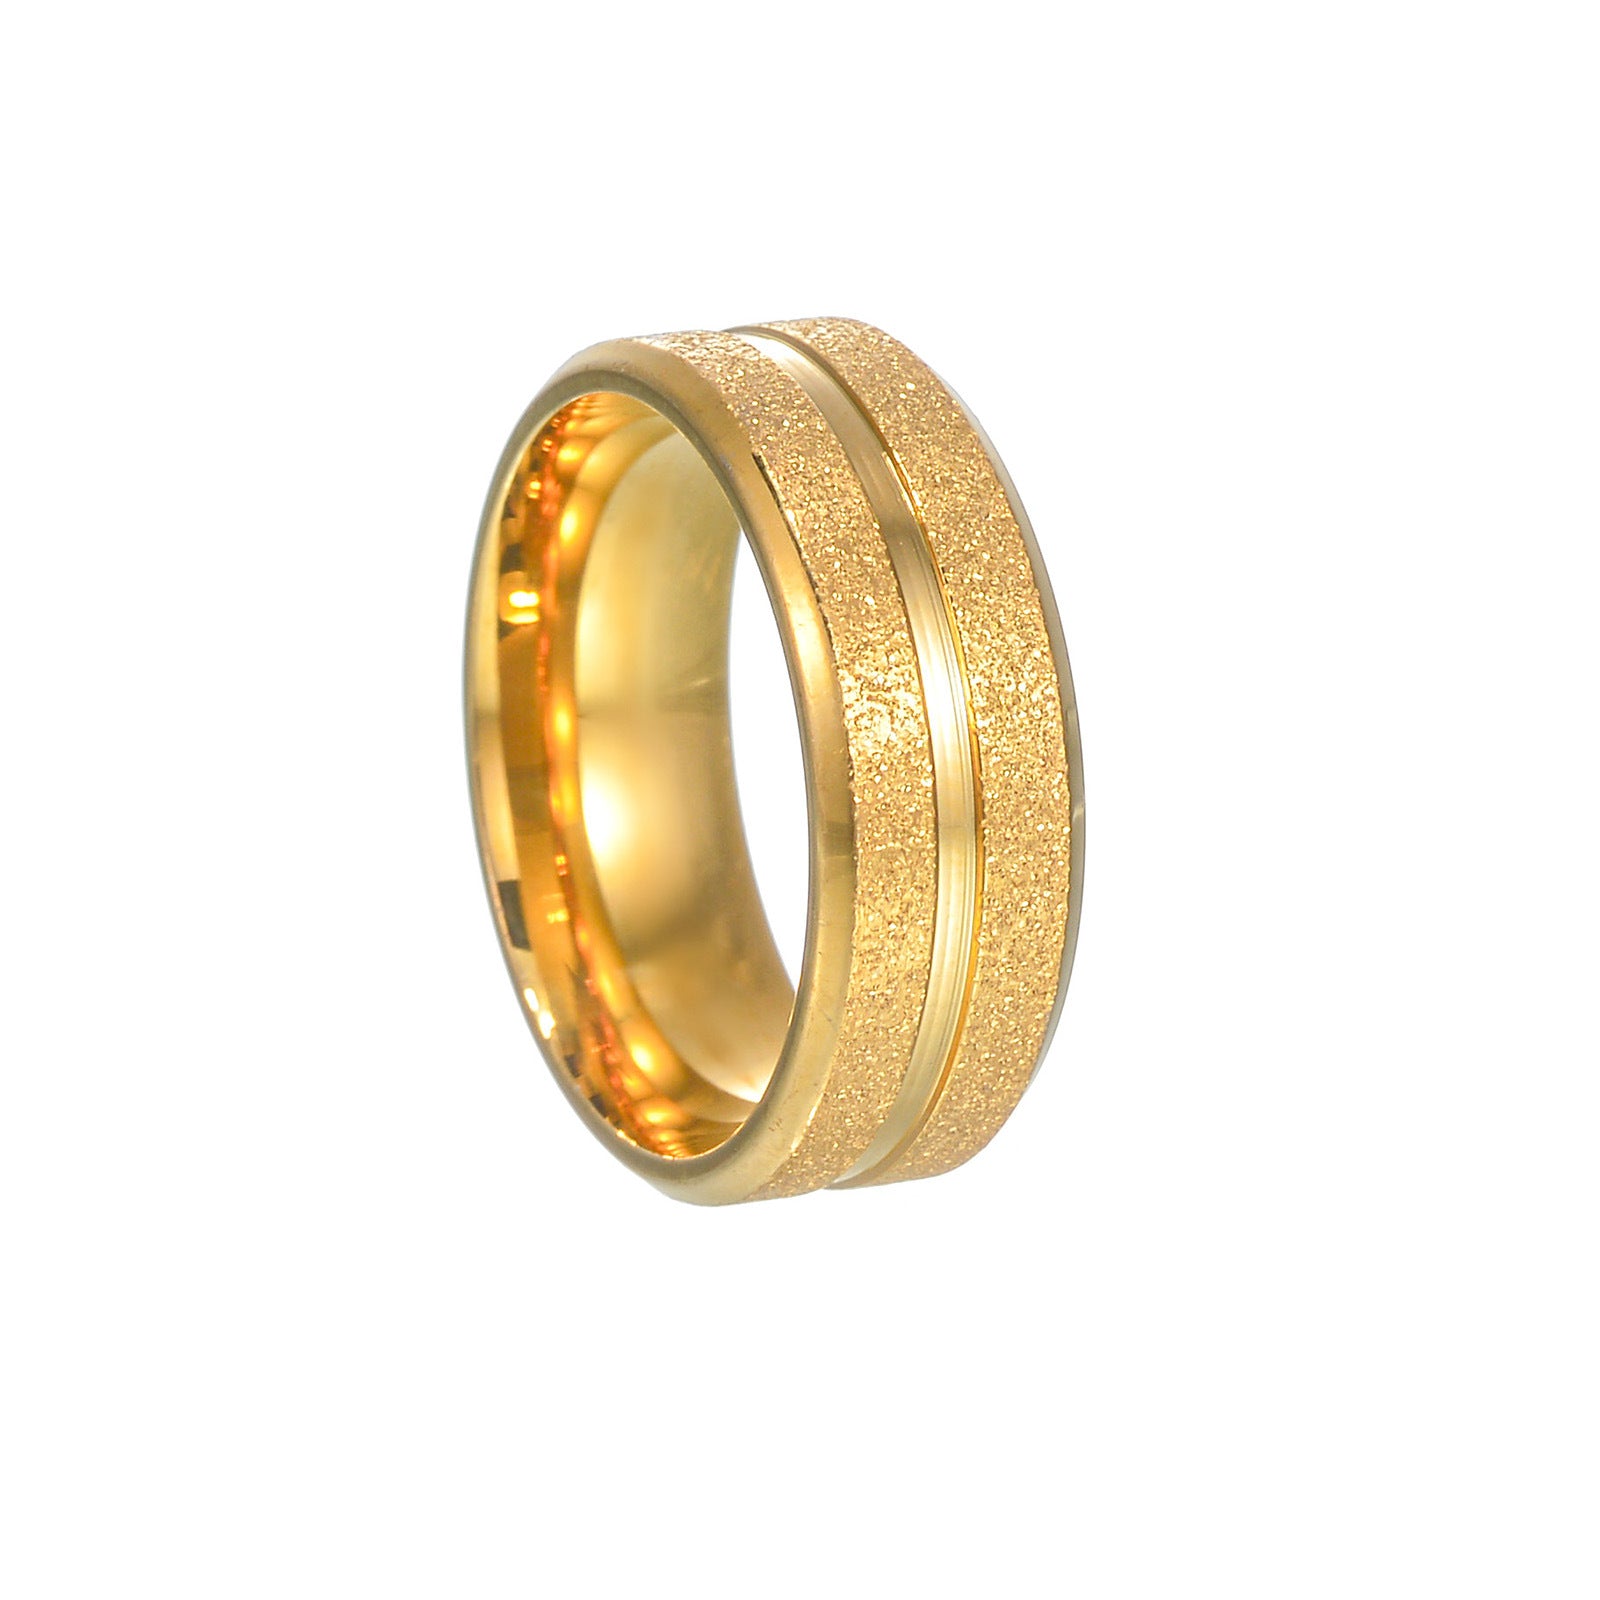 European And American Electroplated Placer Gold Jewelry 8mm Stainless Steel Ring